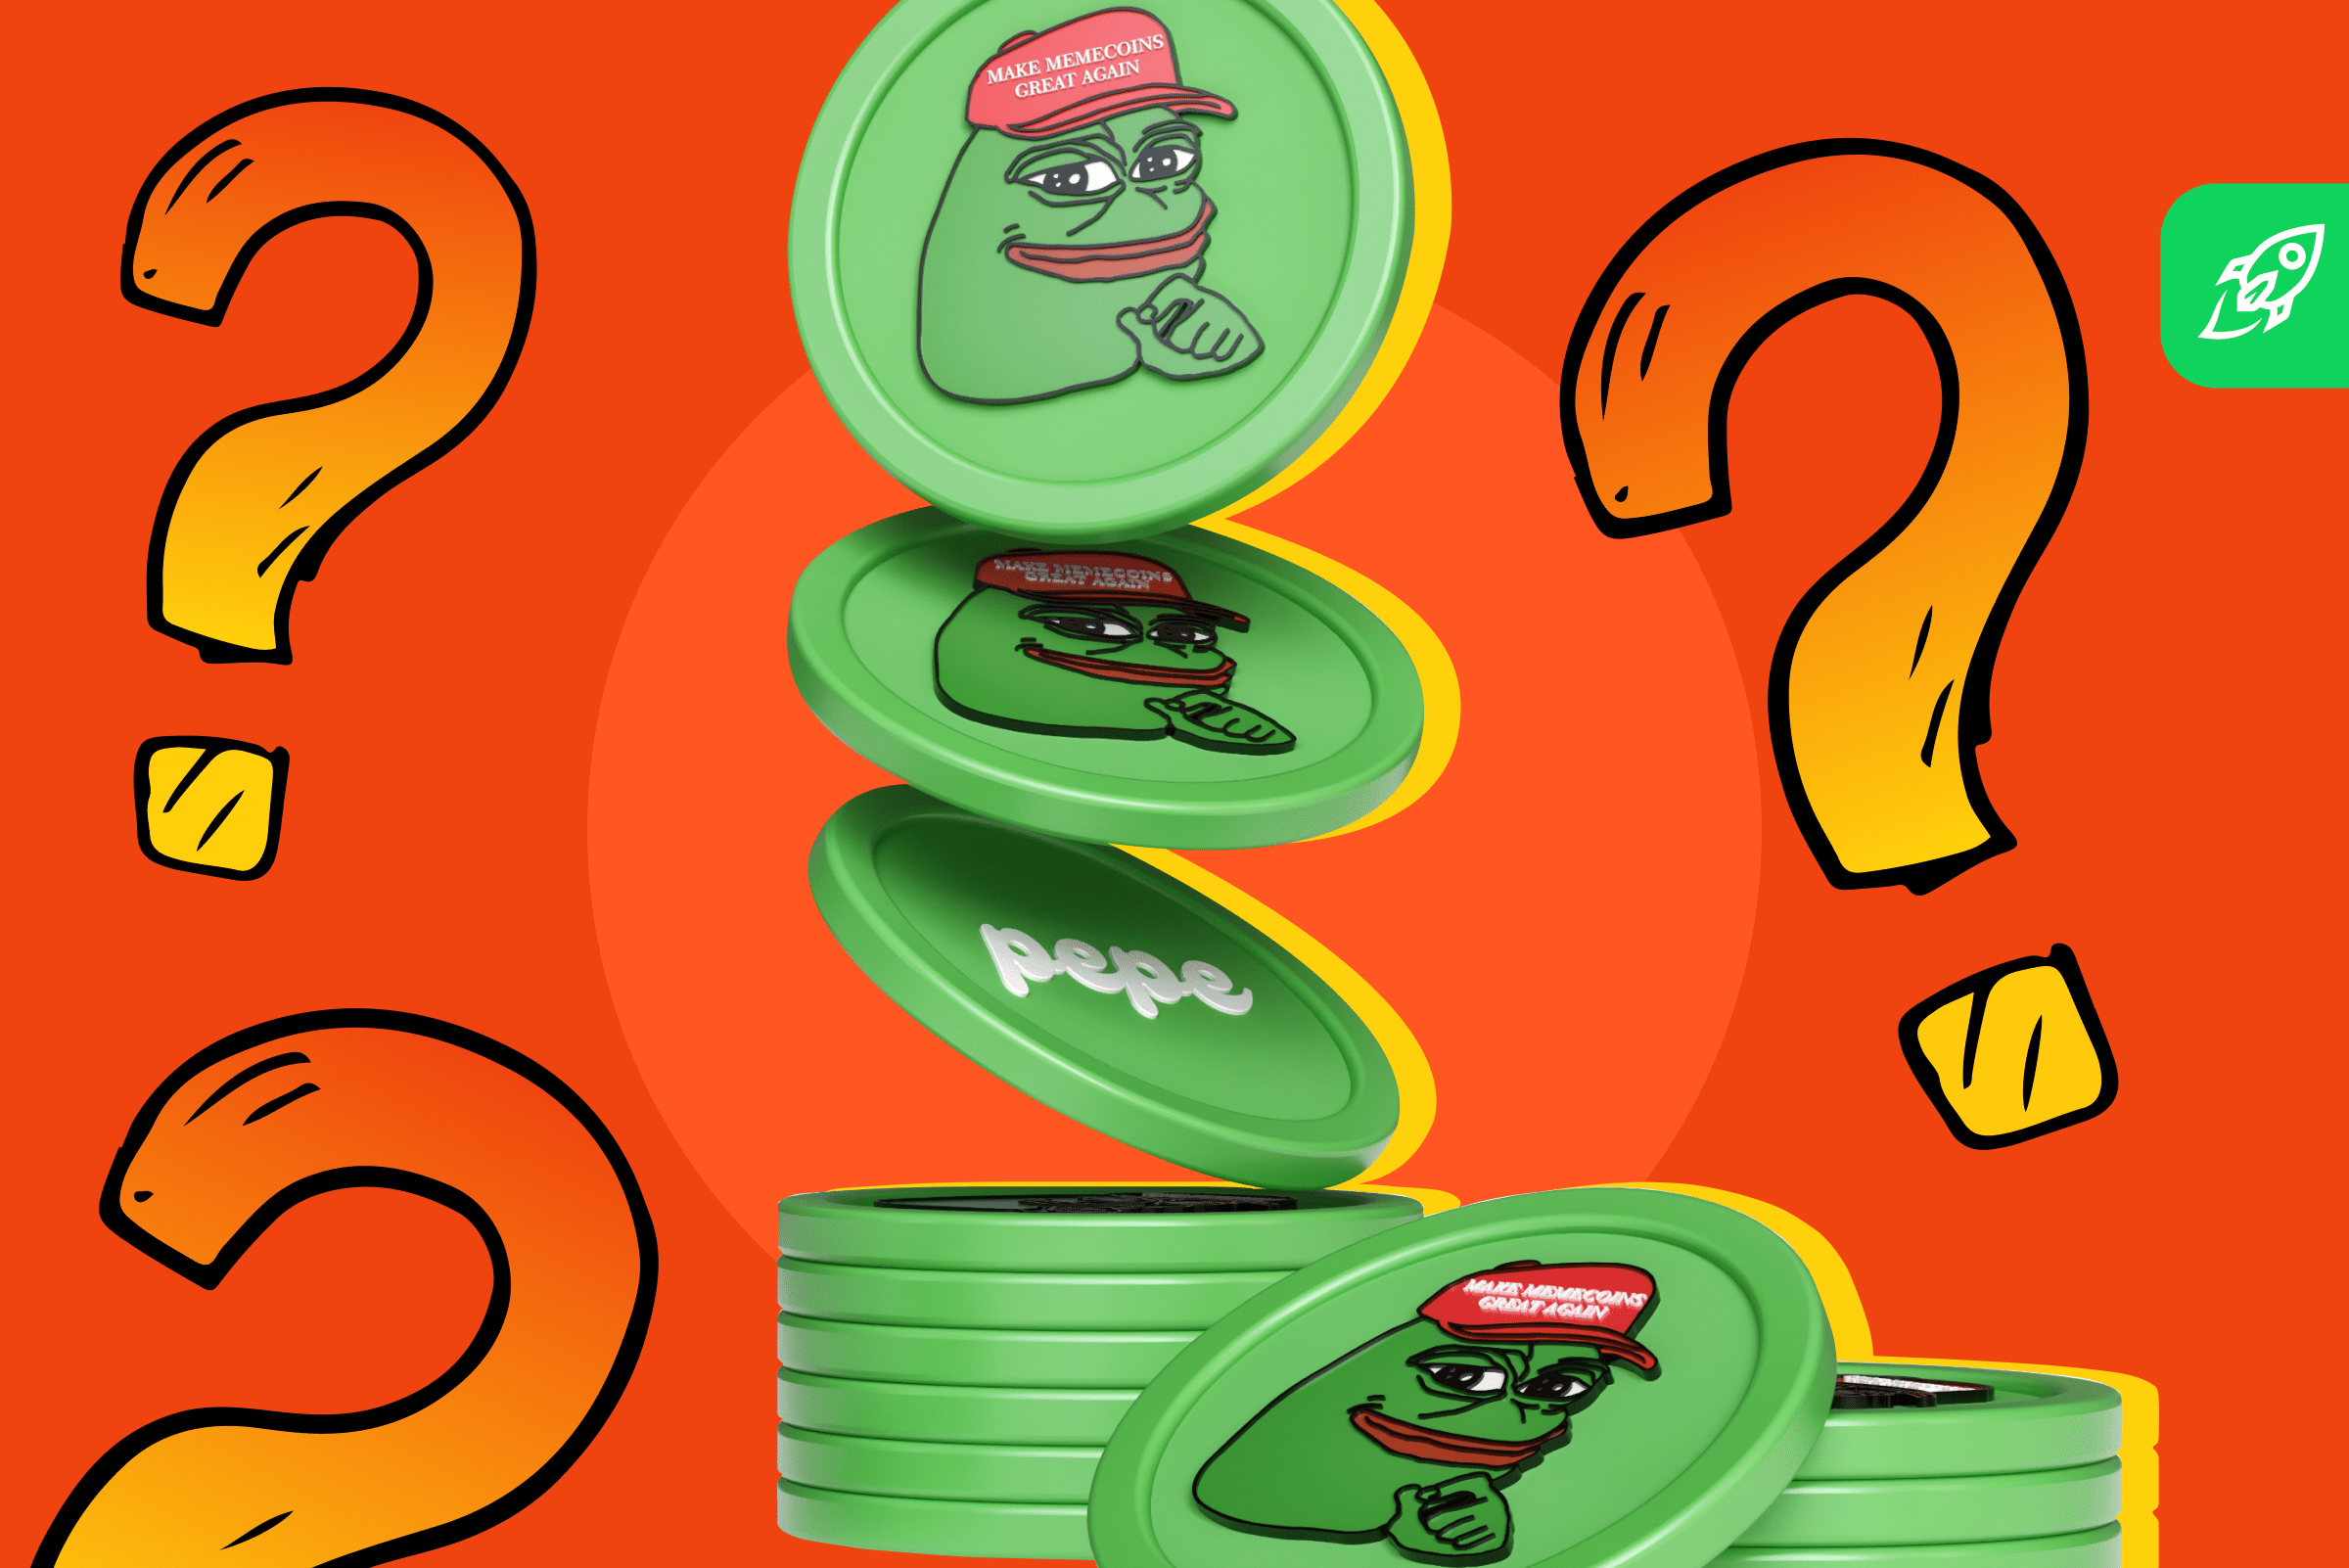 What Is Pepe Coin?: Guide to the memecoin